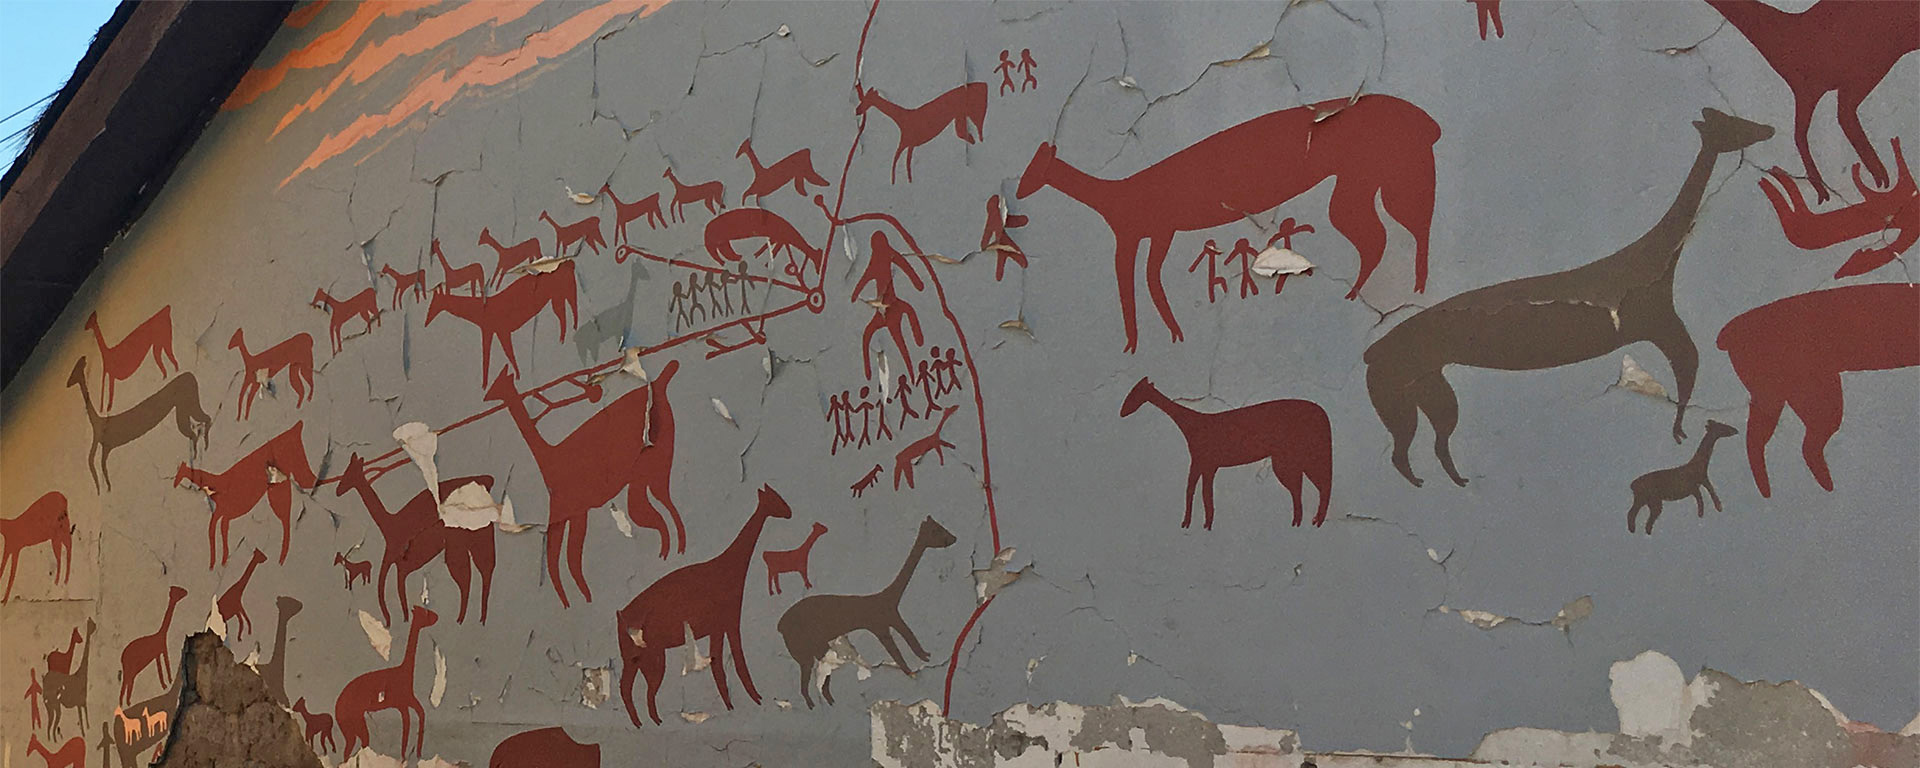 Painted animal graphics on the side of a building.